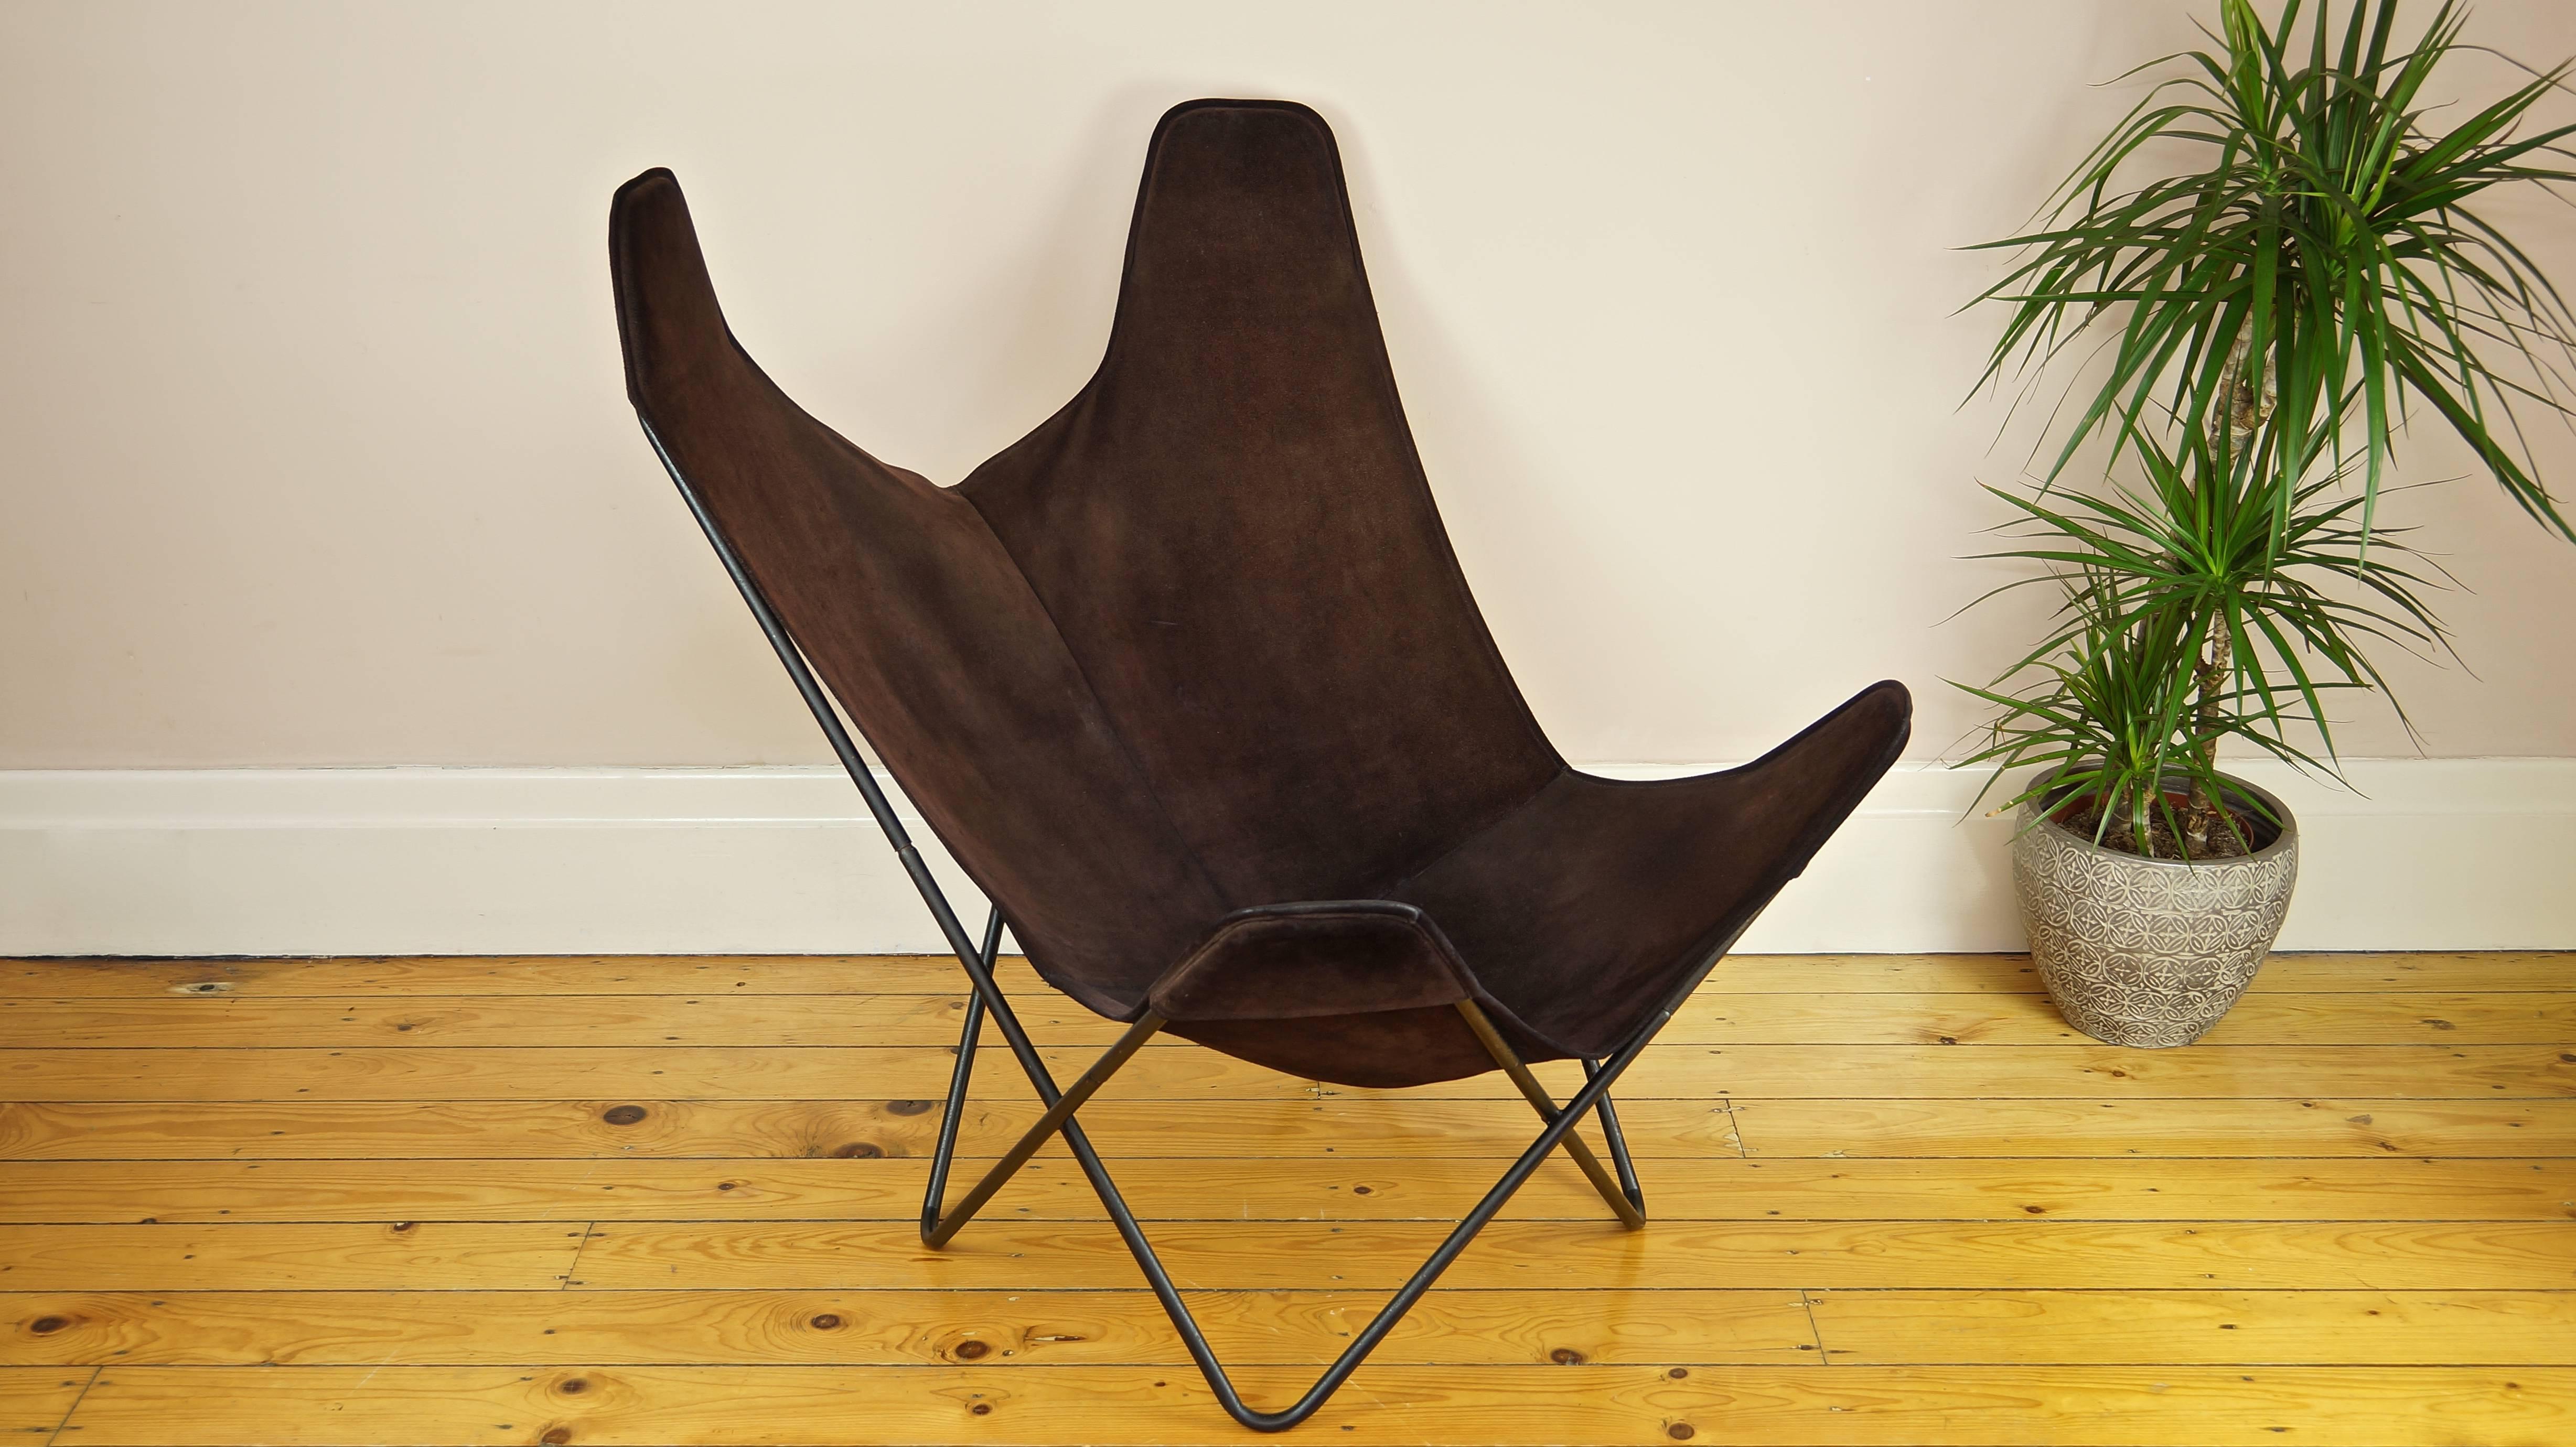 1970s Knoll Butterfly Chair by Jorge Ferrari-Hardoy, Suede Leather Sling Chair 2